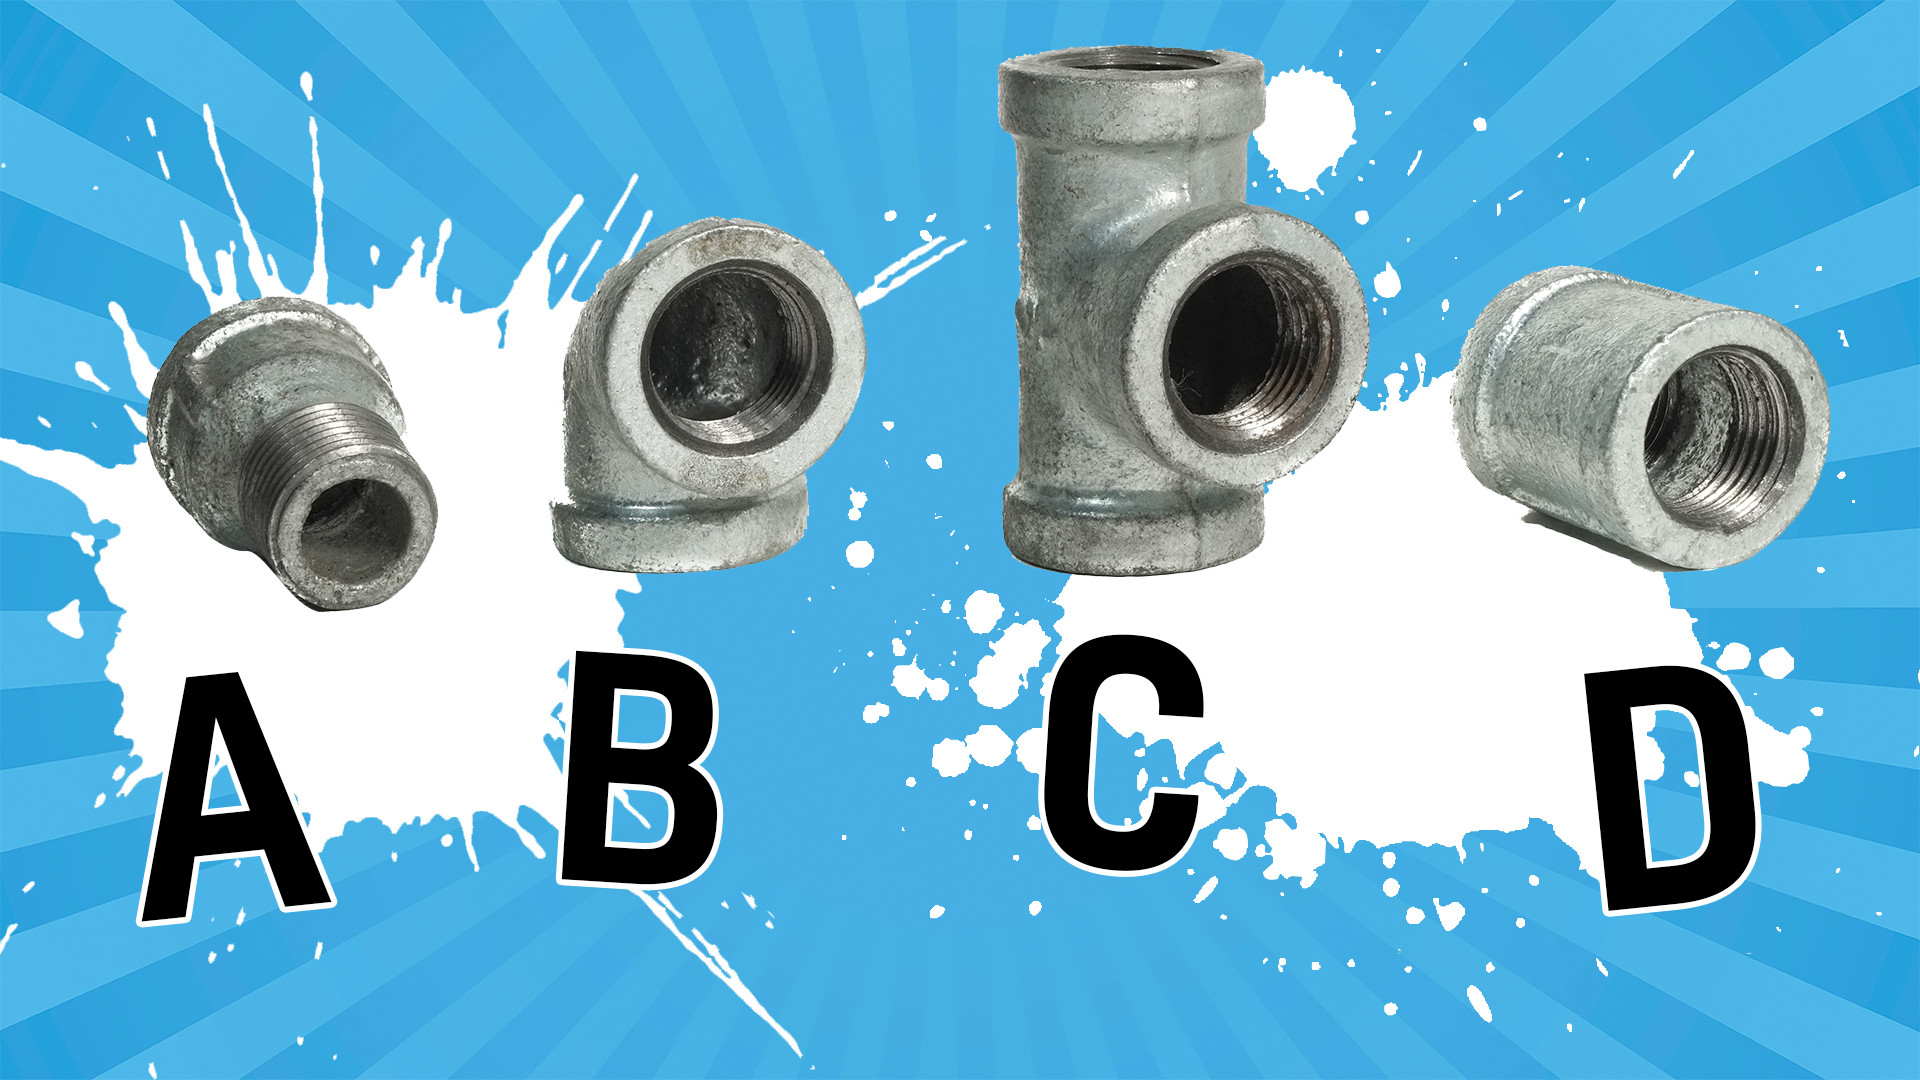 Four different pipe fittings